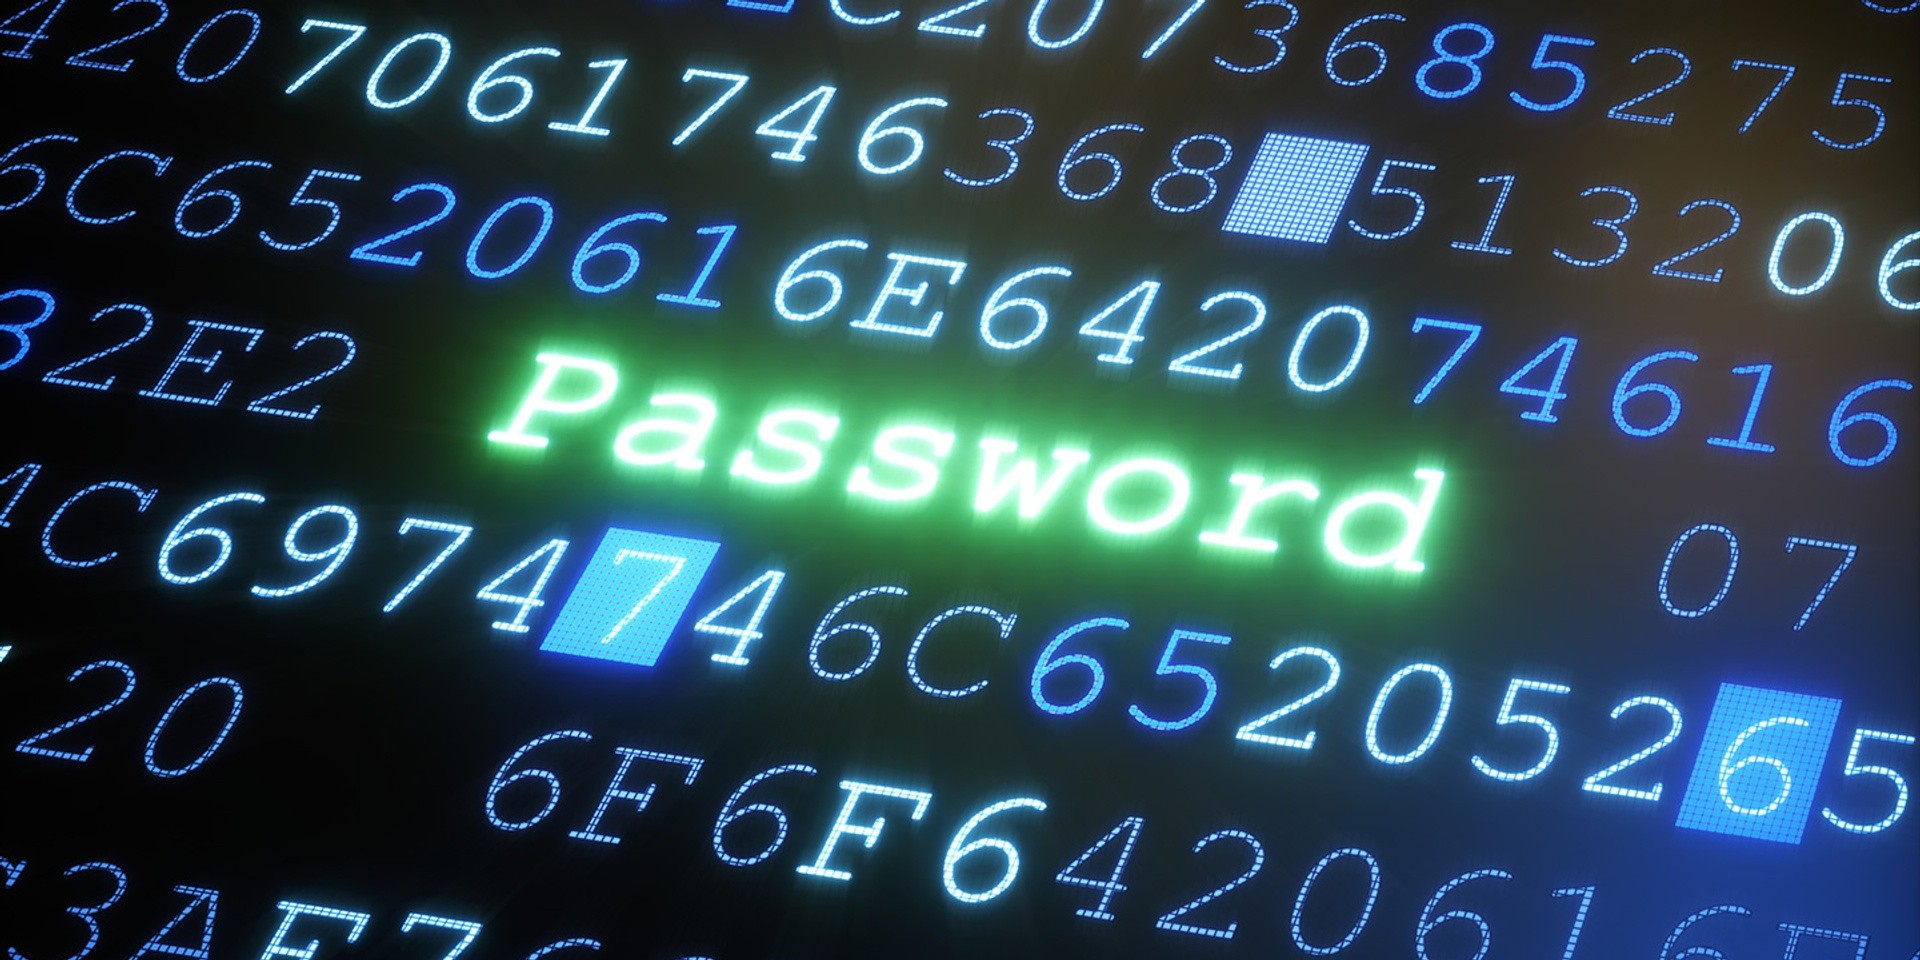 For the sake of your cyber security, please stop using band names as passwords